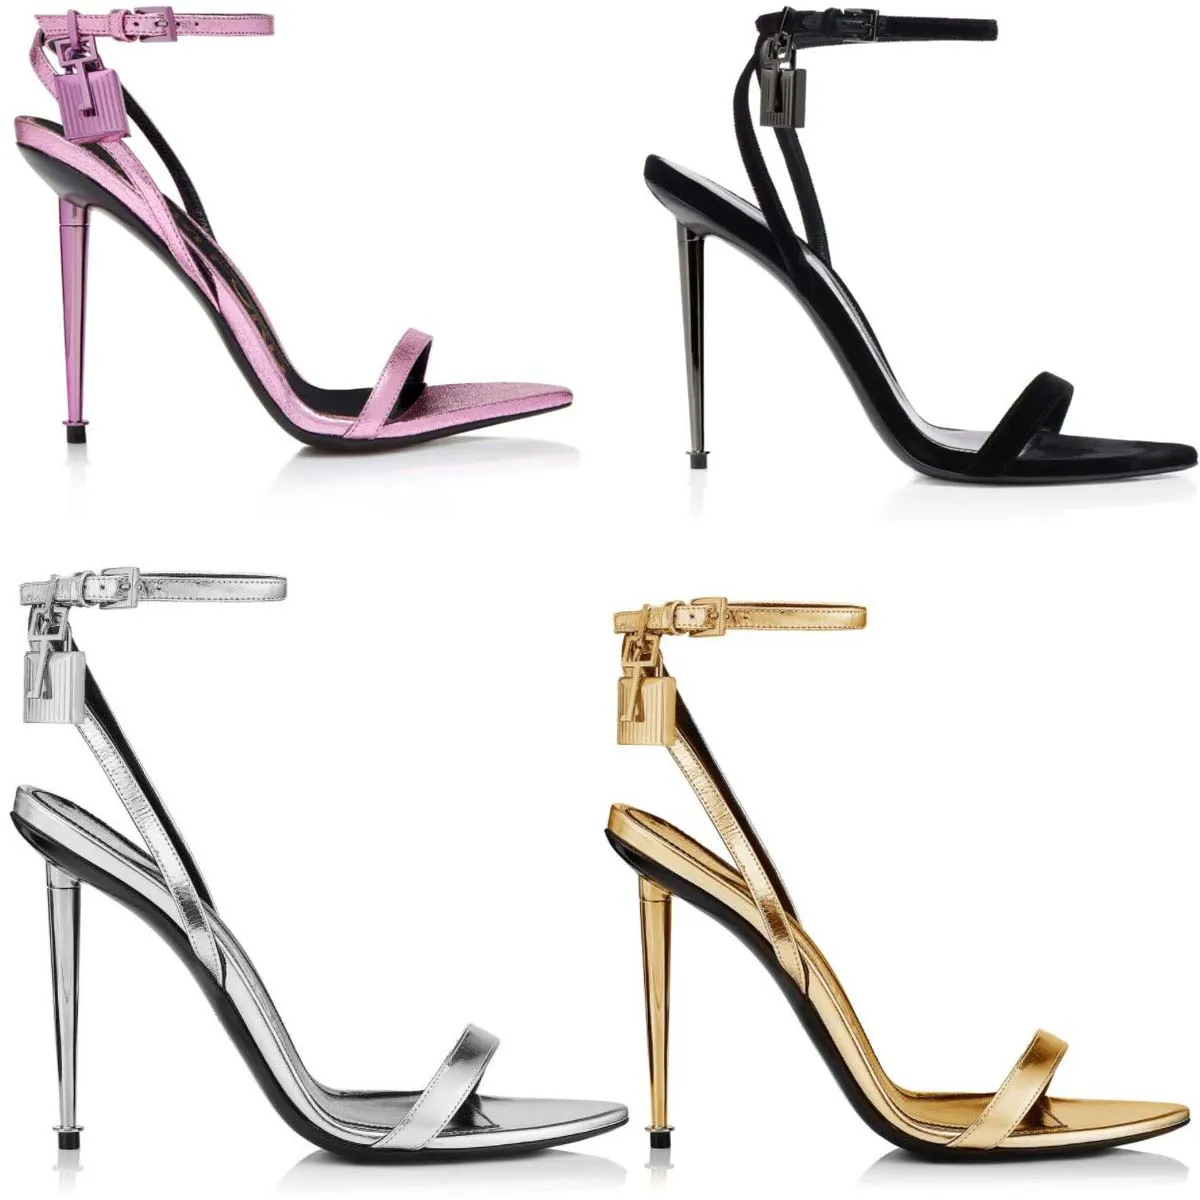 Luxury pop woman sandal padlock Lock 105mm gold heels pointy toe Ankle Strap sliver golds Sandals naked leathers sexy heel sandals 35-44EU